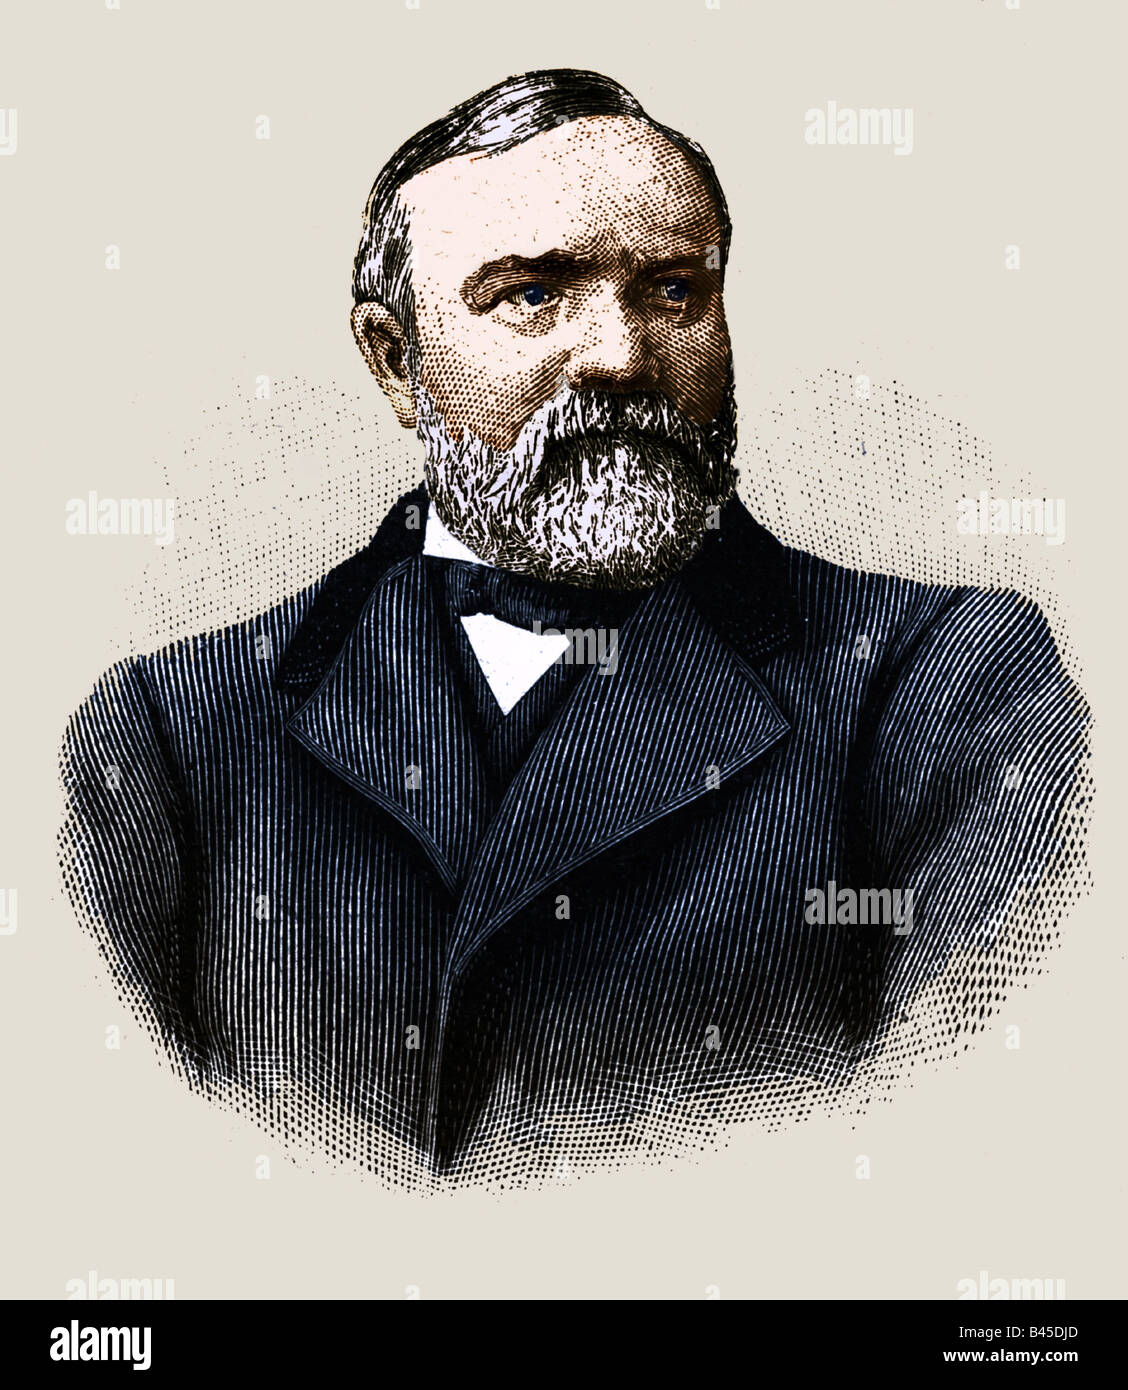 Carnegie, Andrew, 25.11.1835 - 11.8.1919, Amercan industrialist, portrait, wood engraving, late 19th century, later coloured, , Stock Photo